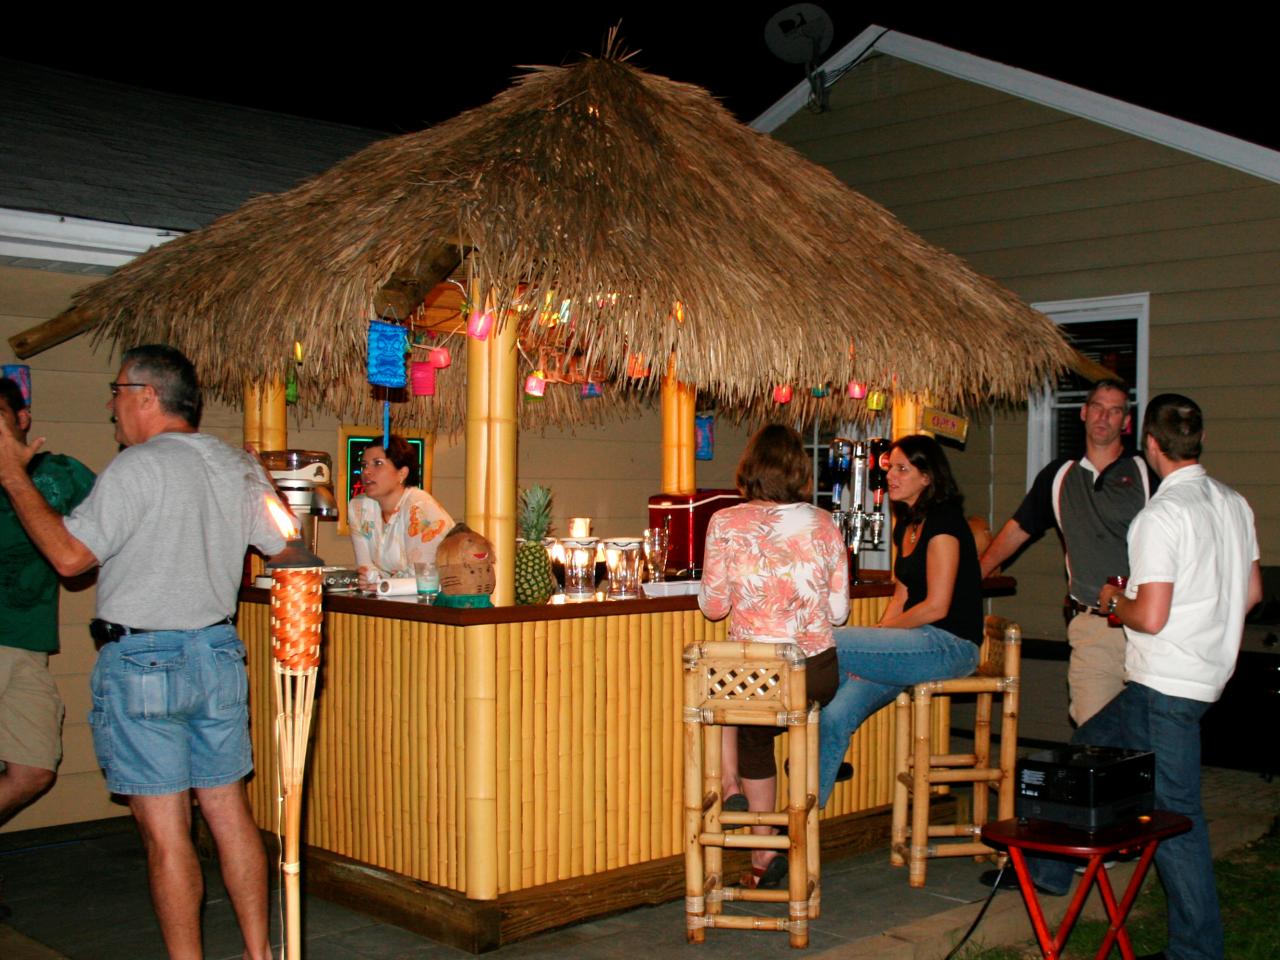 How To Build A Tiki Bar With A Thatched Roof HGTV